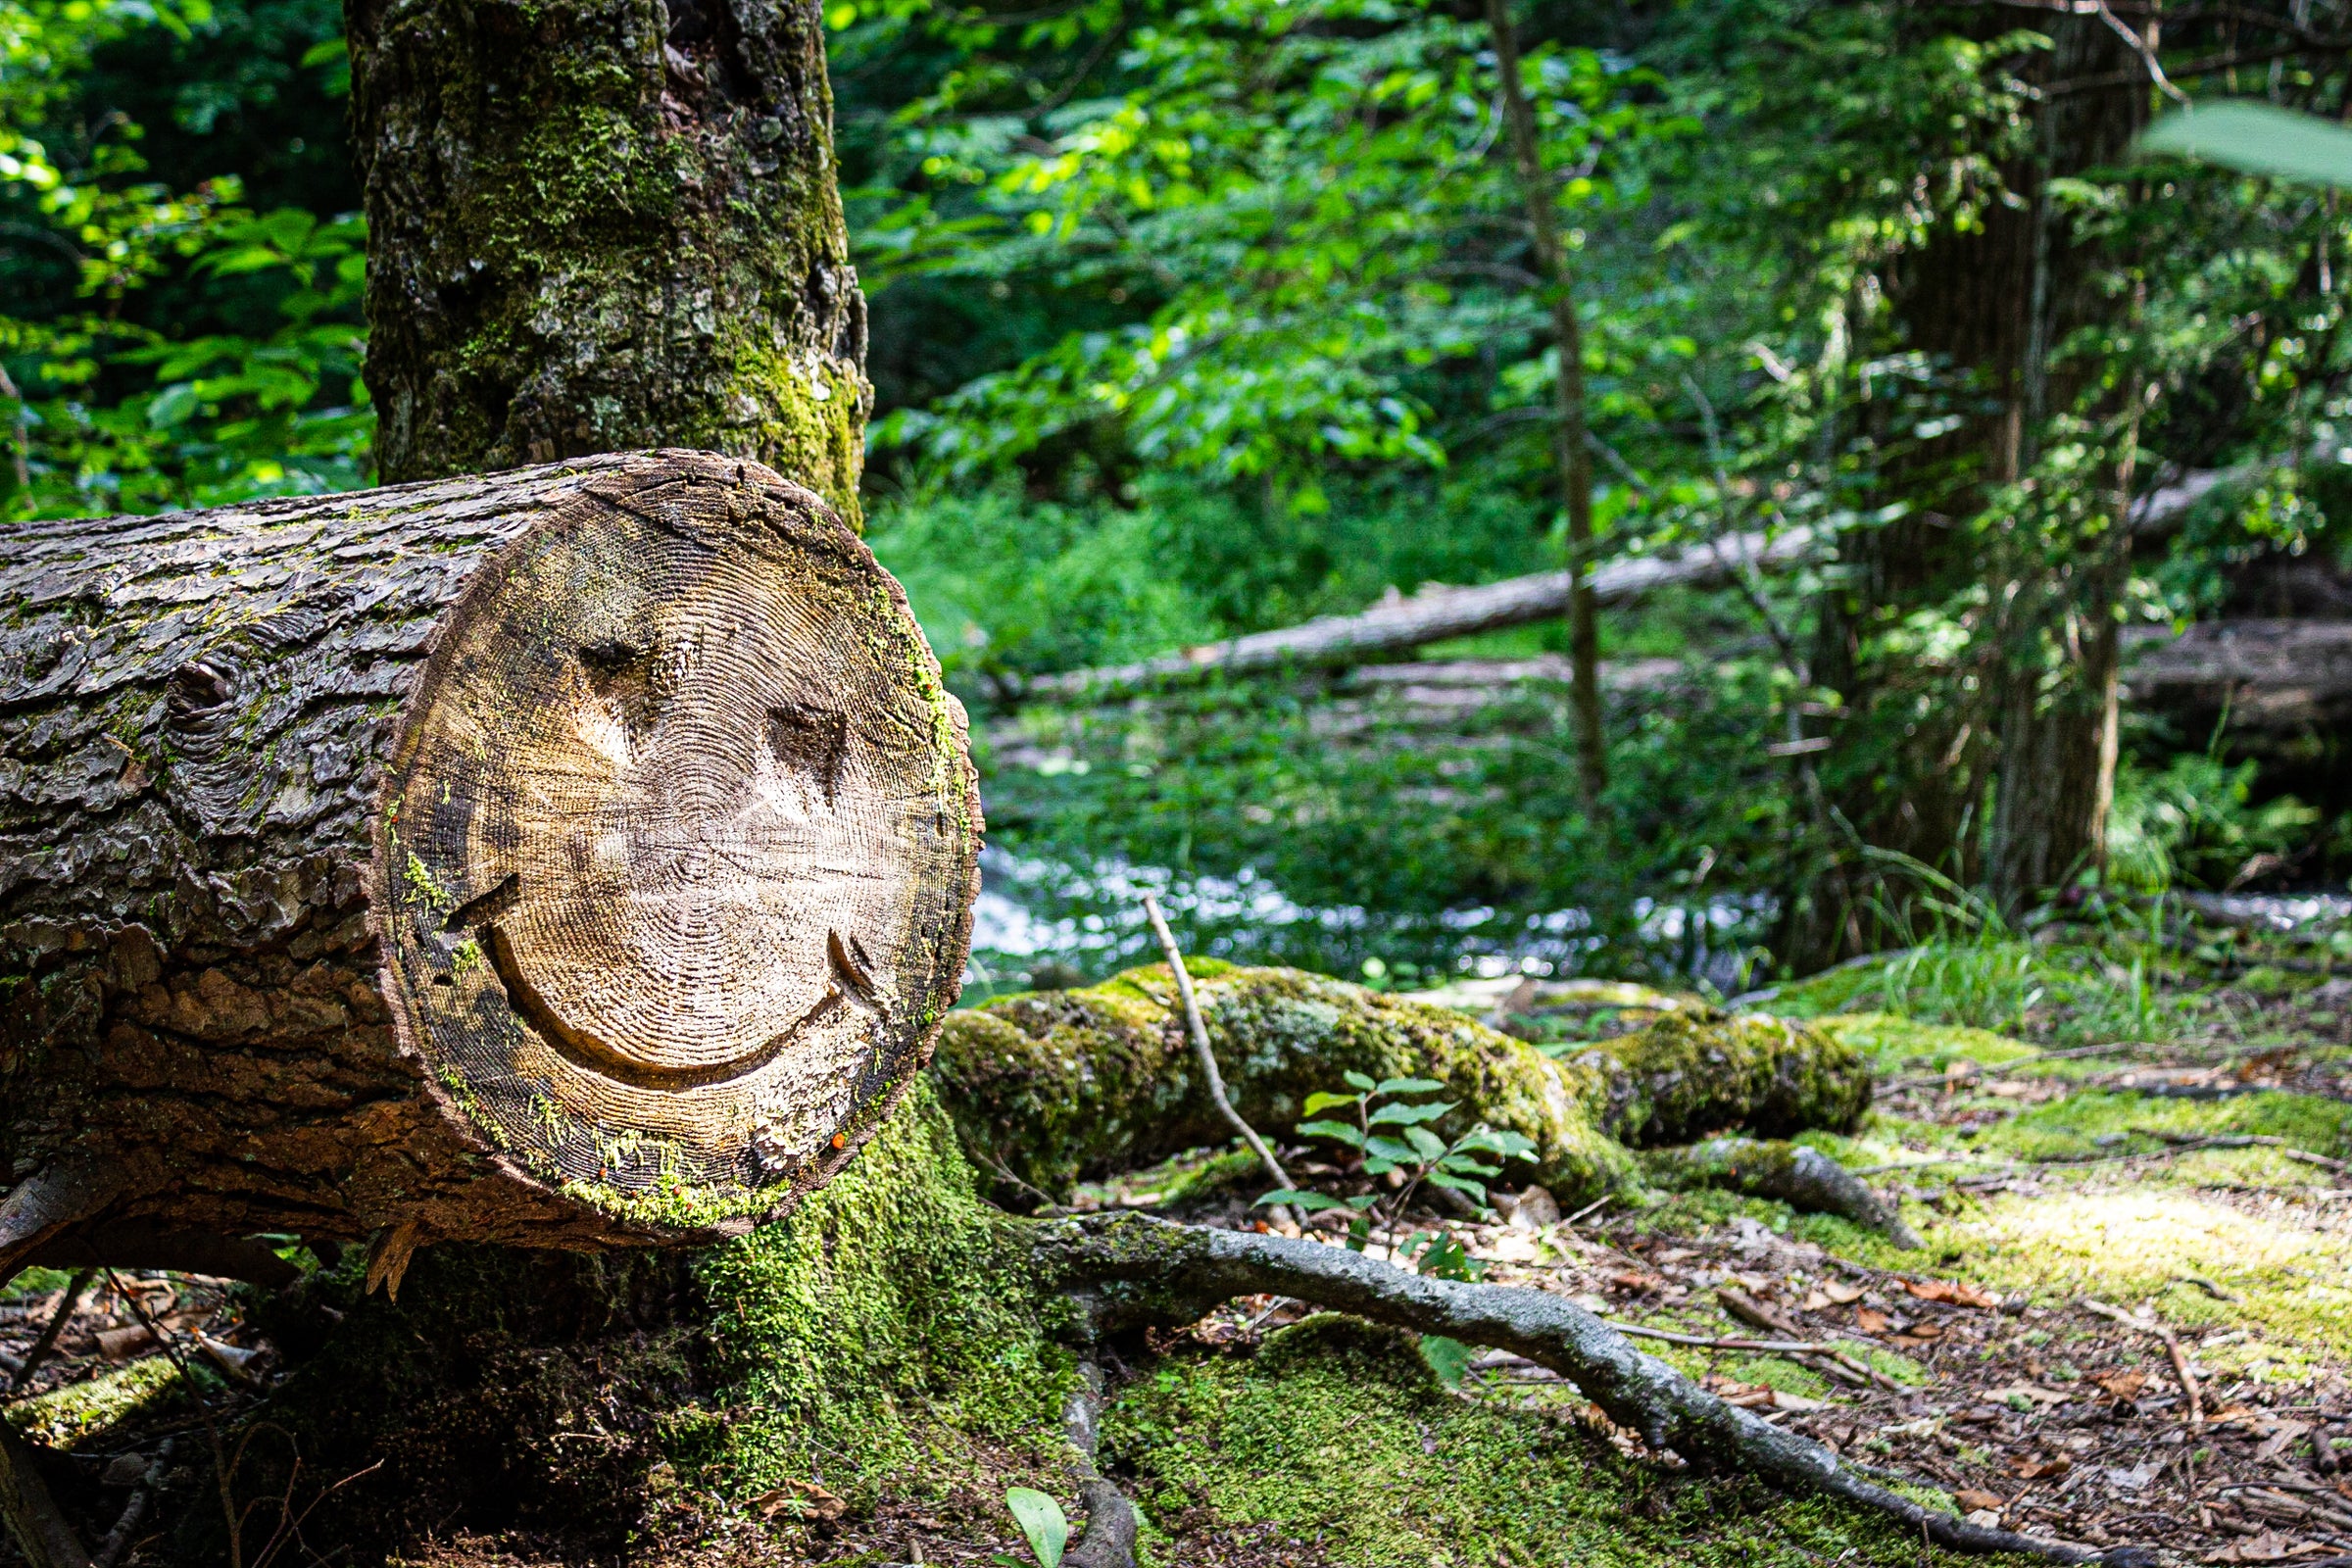 Happy Smiling Smiley Face Carved into Tree on Hiking Trail in Pennsylvania PA while on Hiking Trail Exploring and Finding New Things to Do Outdoors and in Nature Promoting Healthy Lifestyle and Mental Health